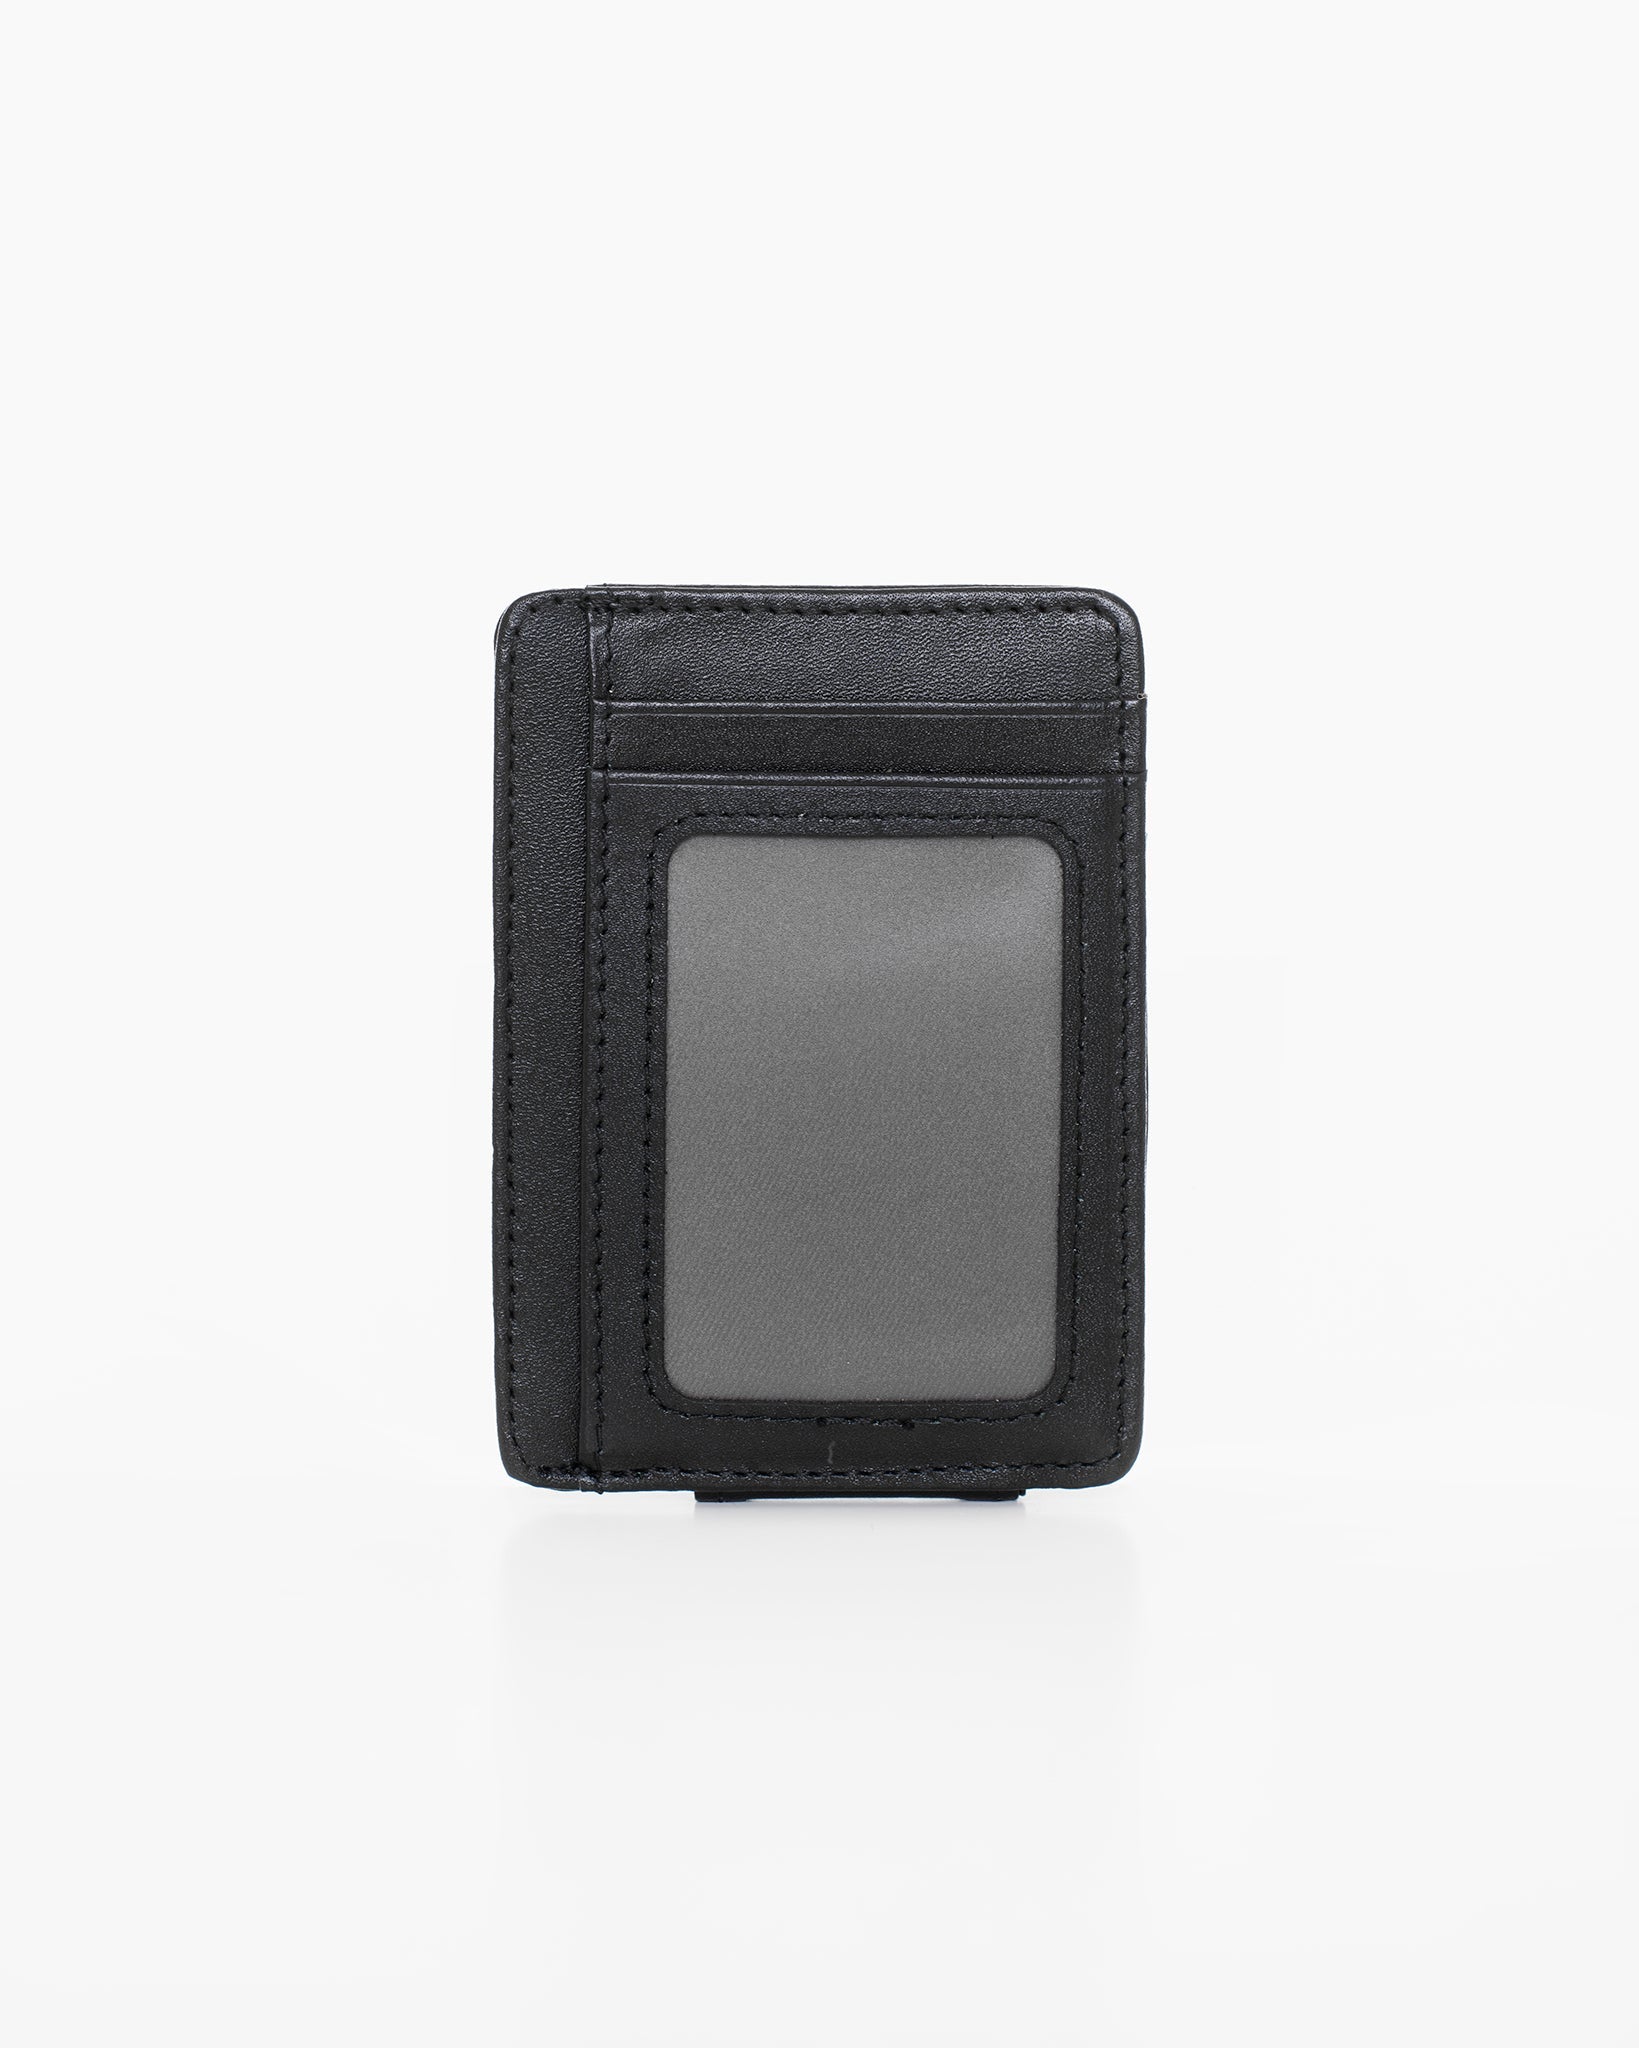 A black leather RFID-blocking card holder by Nabo, featuring 8 slots, one transparent, with a magnetic cash clip. Dimensions: 11 x 8 x 1 cm.